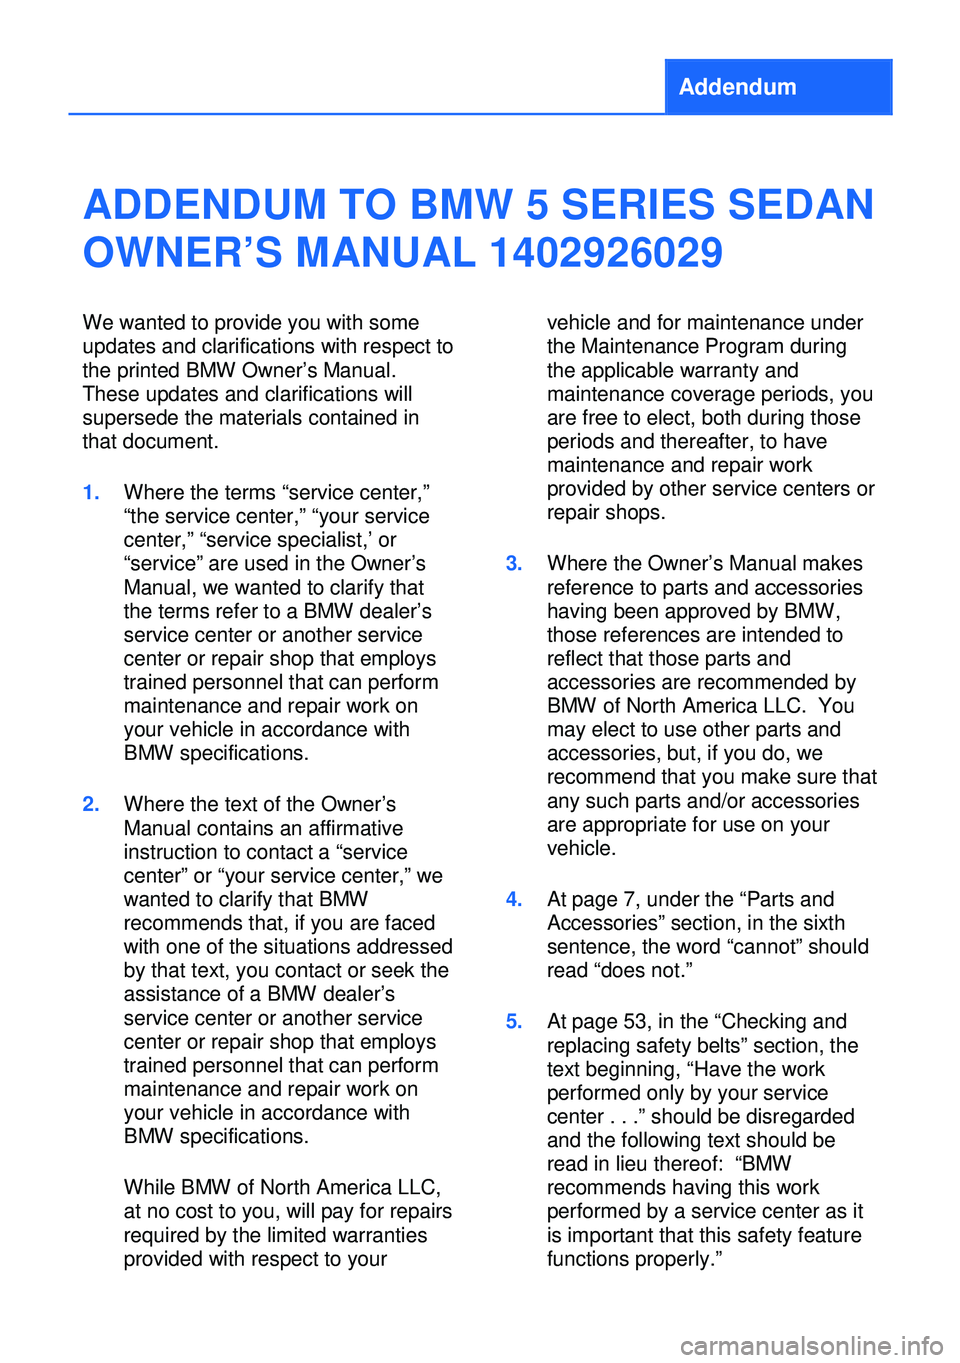 BMW 5 SERIES 2013 F10 Owners Manual Addendum
ADDENDUM TO BMW 5 SERIES SEDAN
OWNER’S MANUAL 1402926029
We wanted to provide you with some
updates and clarifications with respect to
the printed BMW Owner’s Manual.
These updates and cl